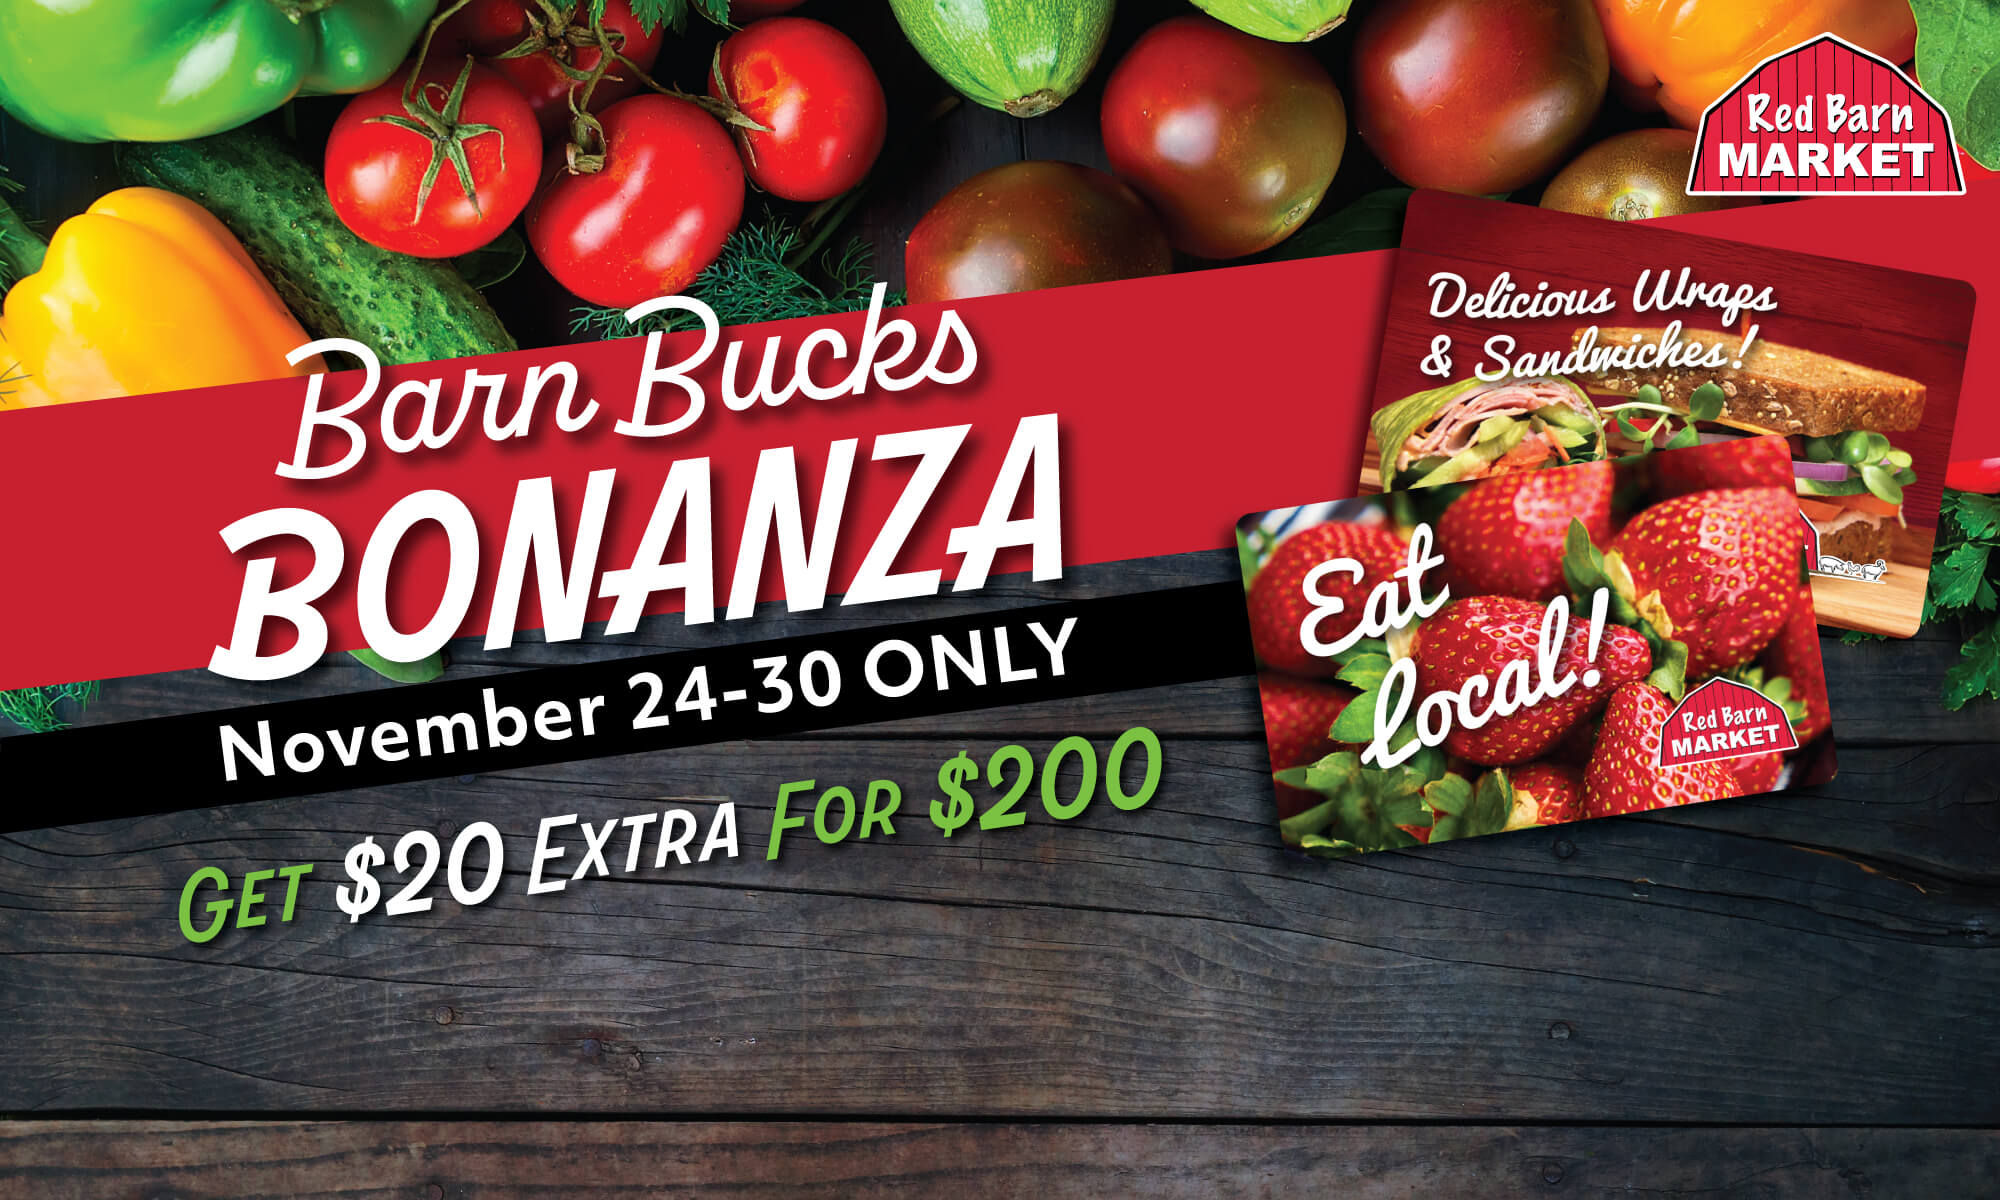 Barn Bucks Bonanza is Back! If you like free groceries then you'll like this offer.  From November 24-30 2022, when you purchase a $100 Barn Bucks gift card, we will add an extra $10 on top for FREE!